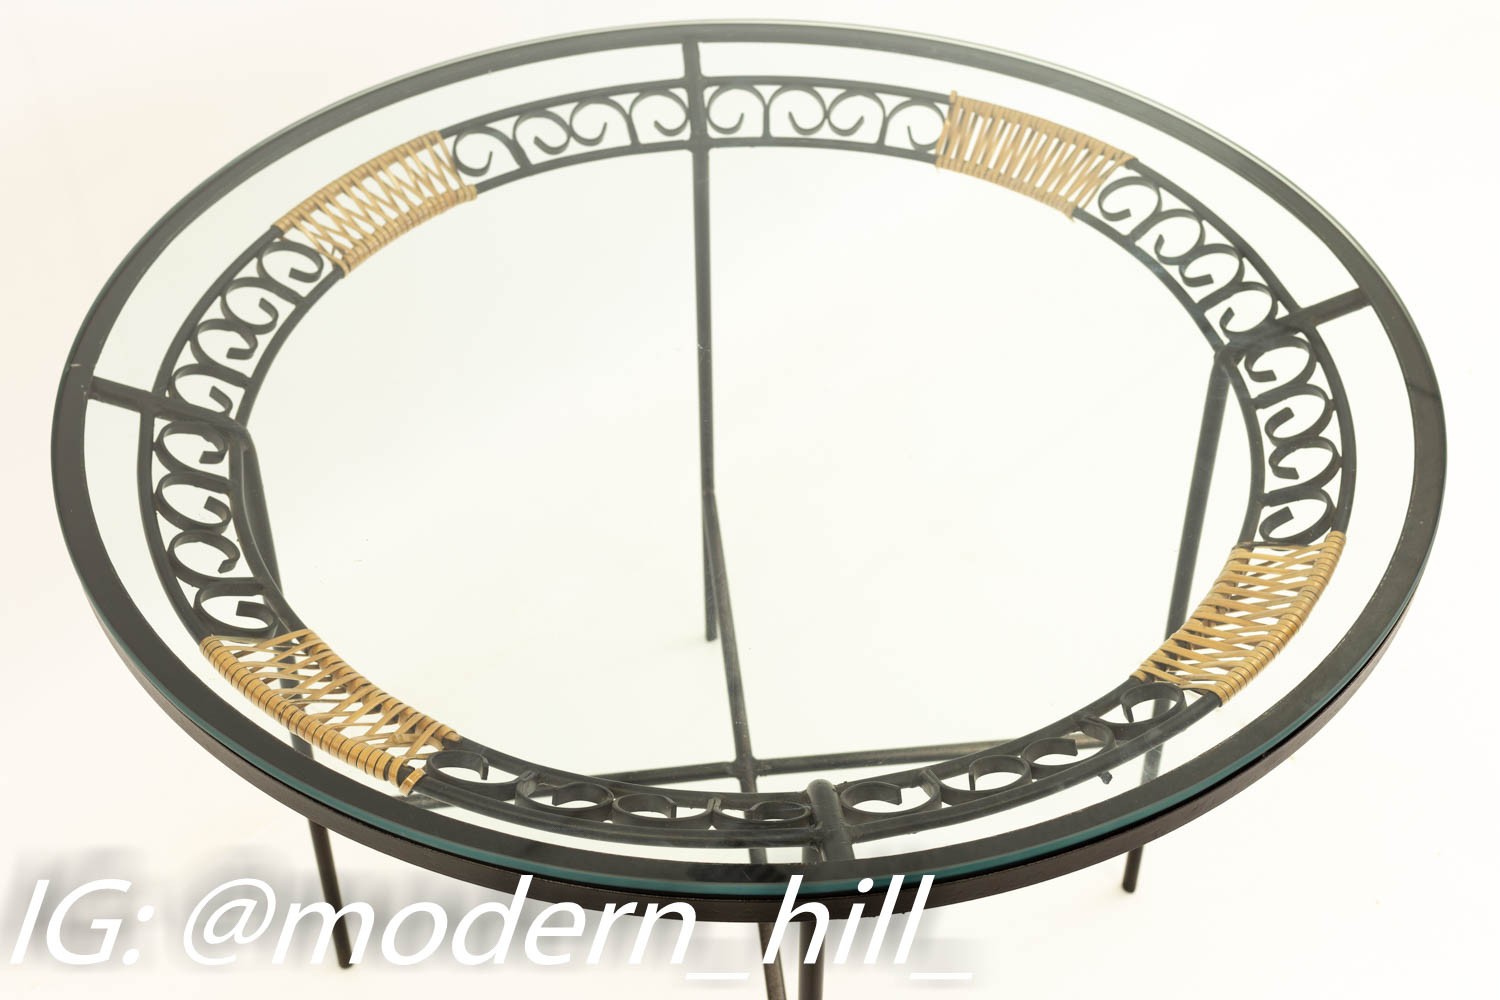 Arthur Umanoff for Shaver Howard Glass & Metal Mid Century Indoor Outdoor Round Dining Table